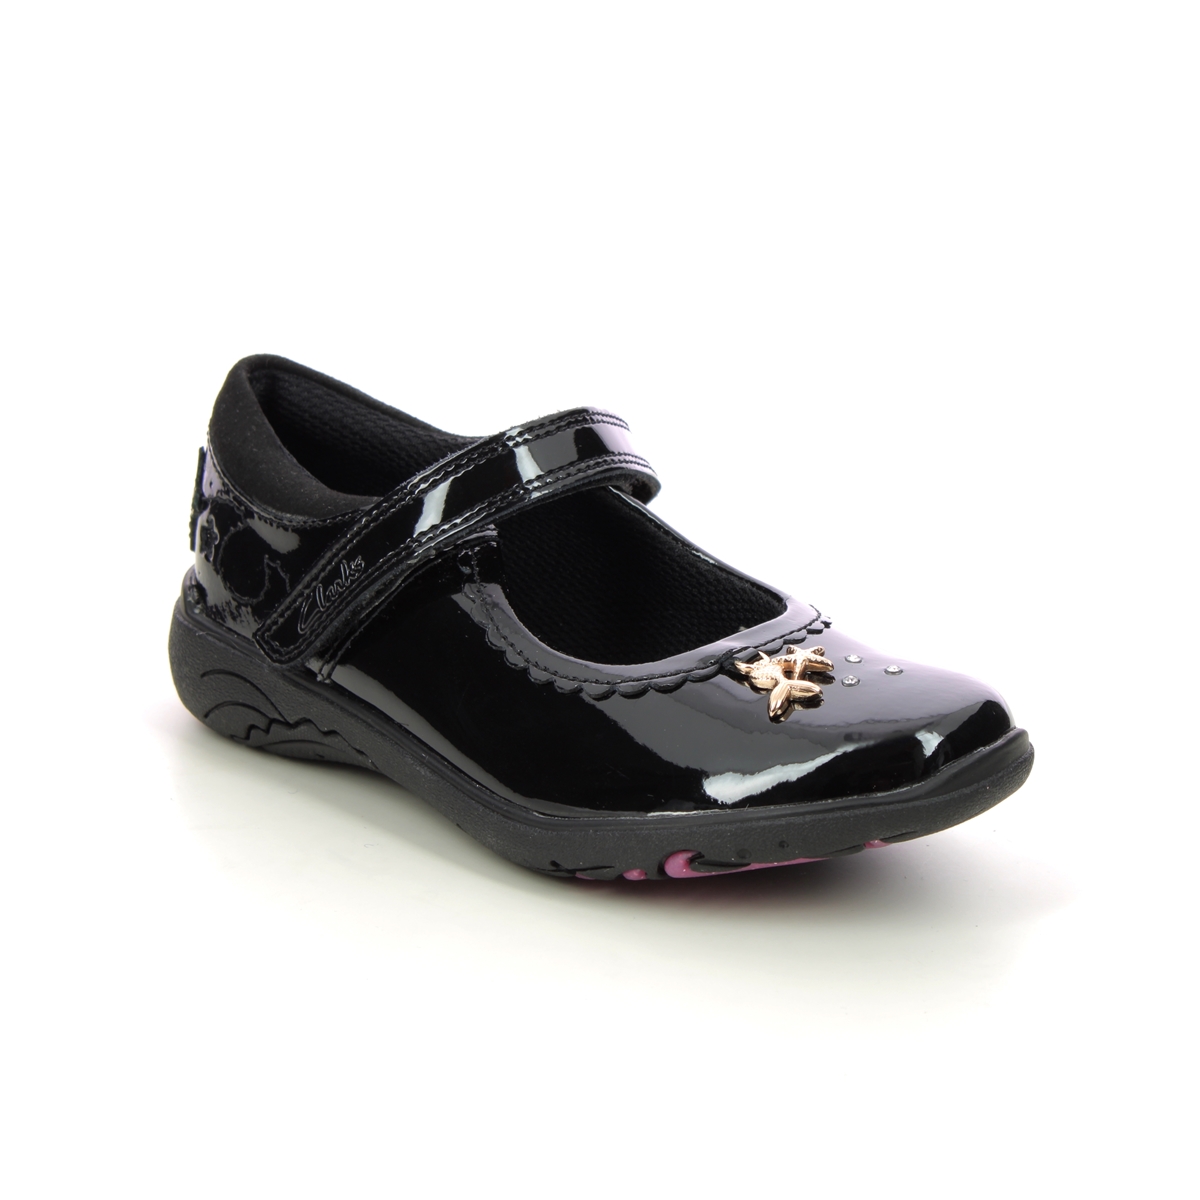 Clarks Relda Sea K Mary Jane Black Patent Kids Girls School Shoes 722418H In Size 10.5 In Plain Black Patent H Width Fitting Extra Wide For School For